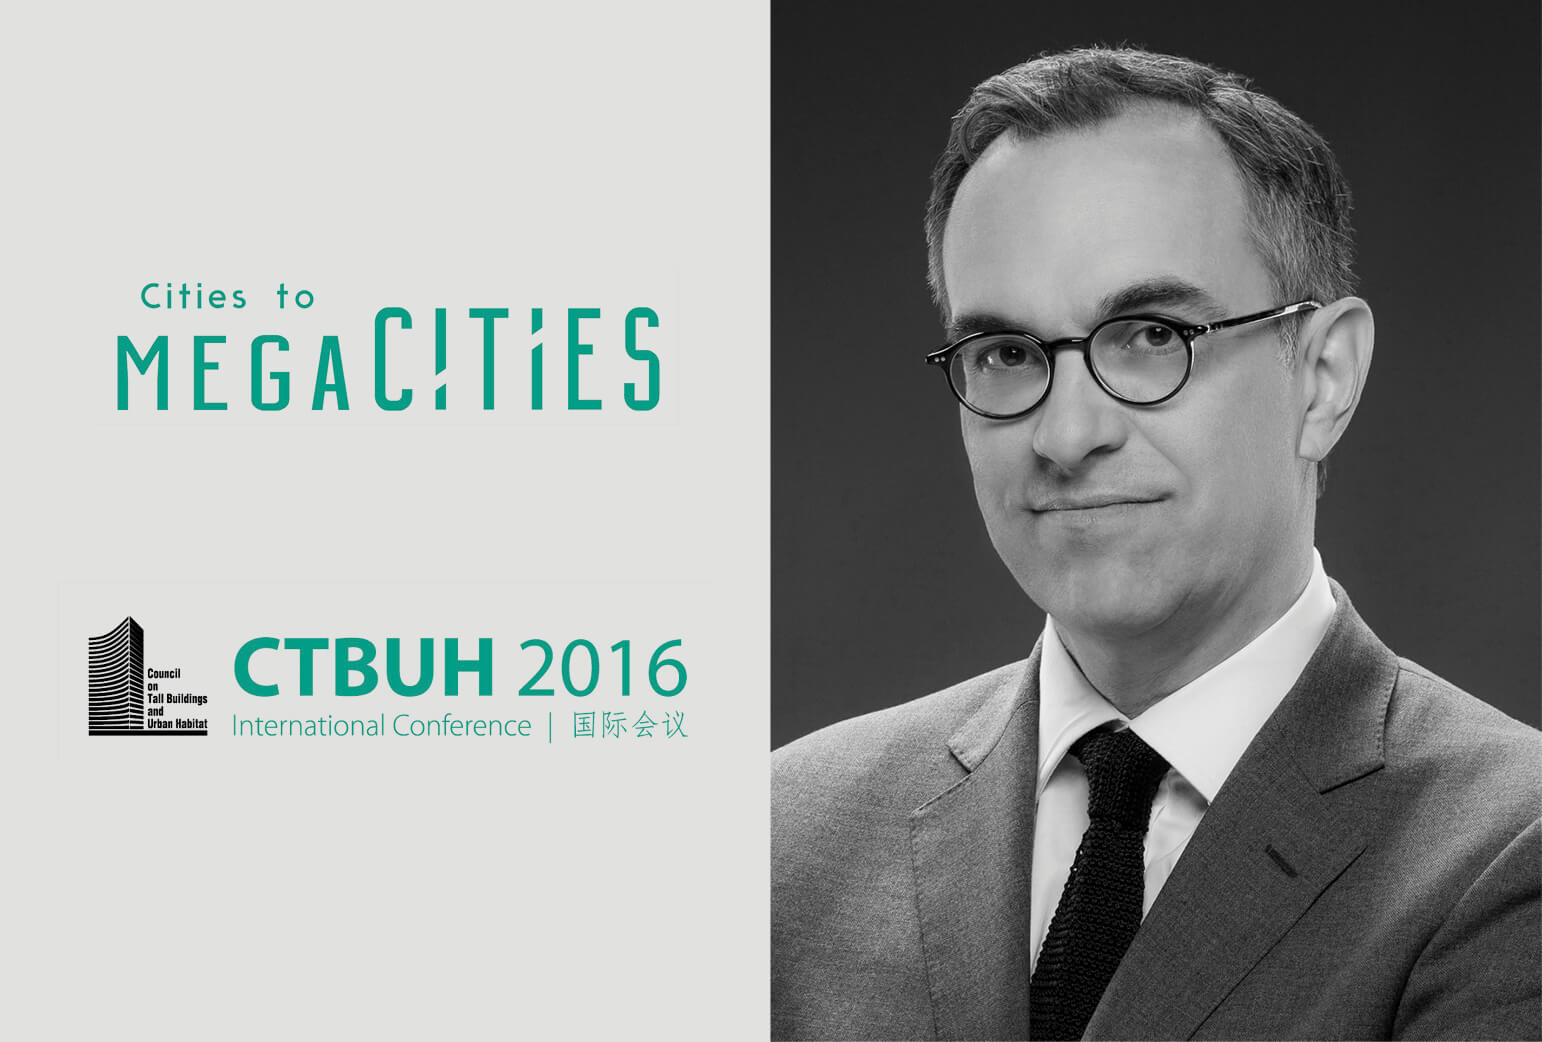 Paul L. Whalen to Present at the CTBUH's "Cities to Megacities"